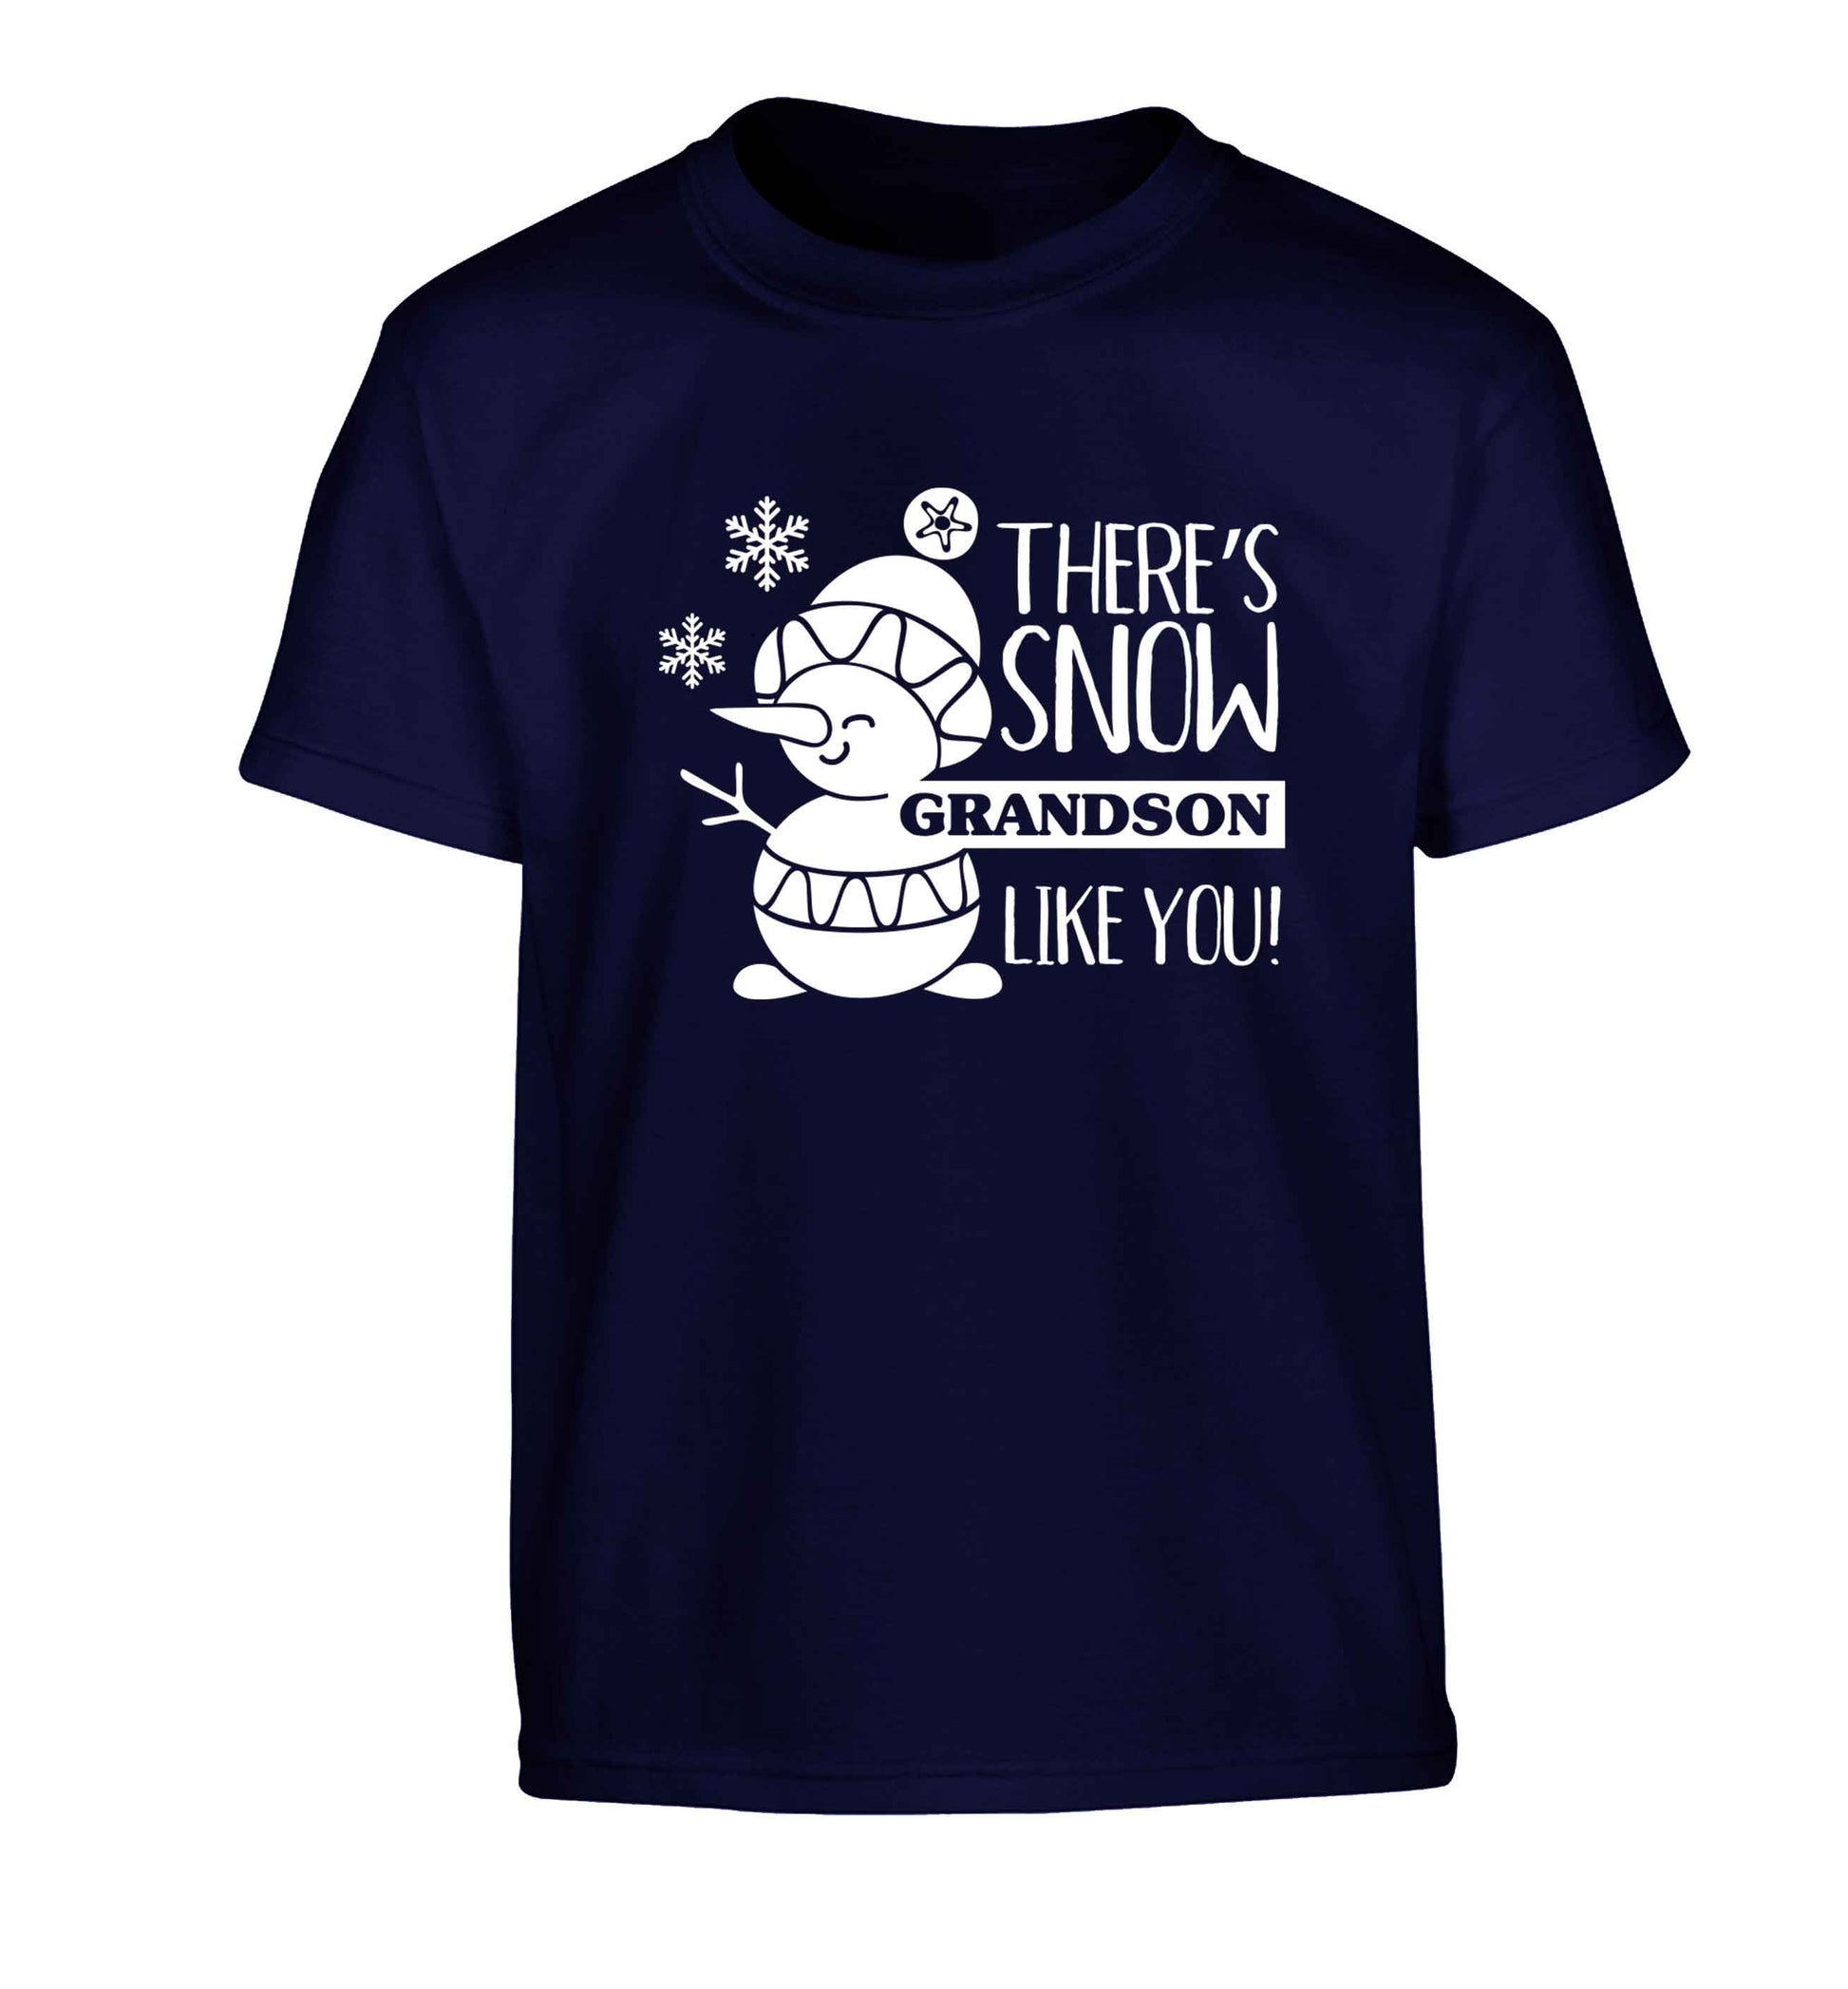 There's snow grandson like you Children's navy Tshirt 12-13 Years